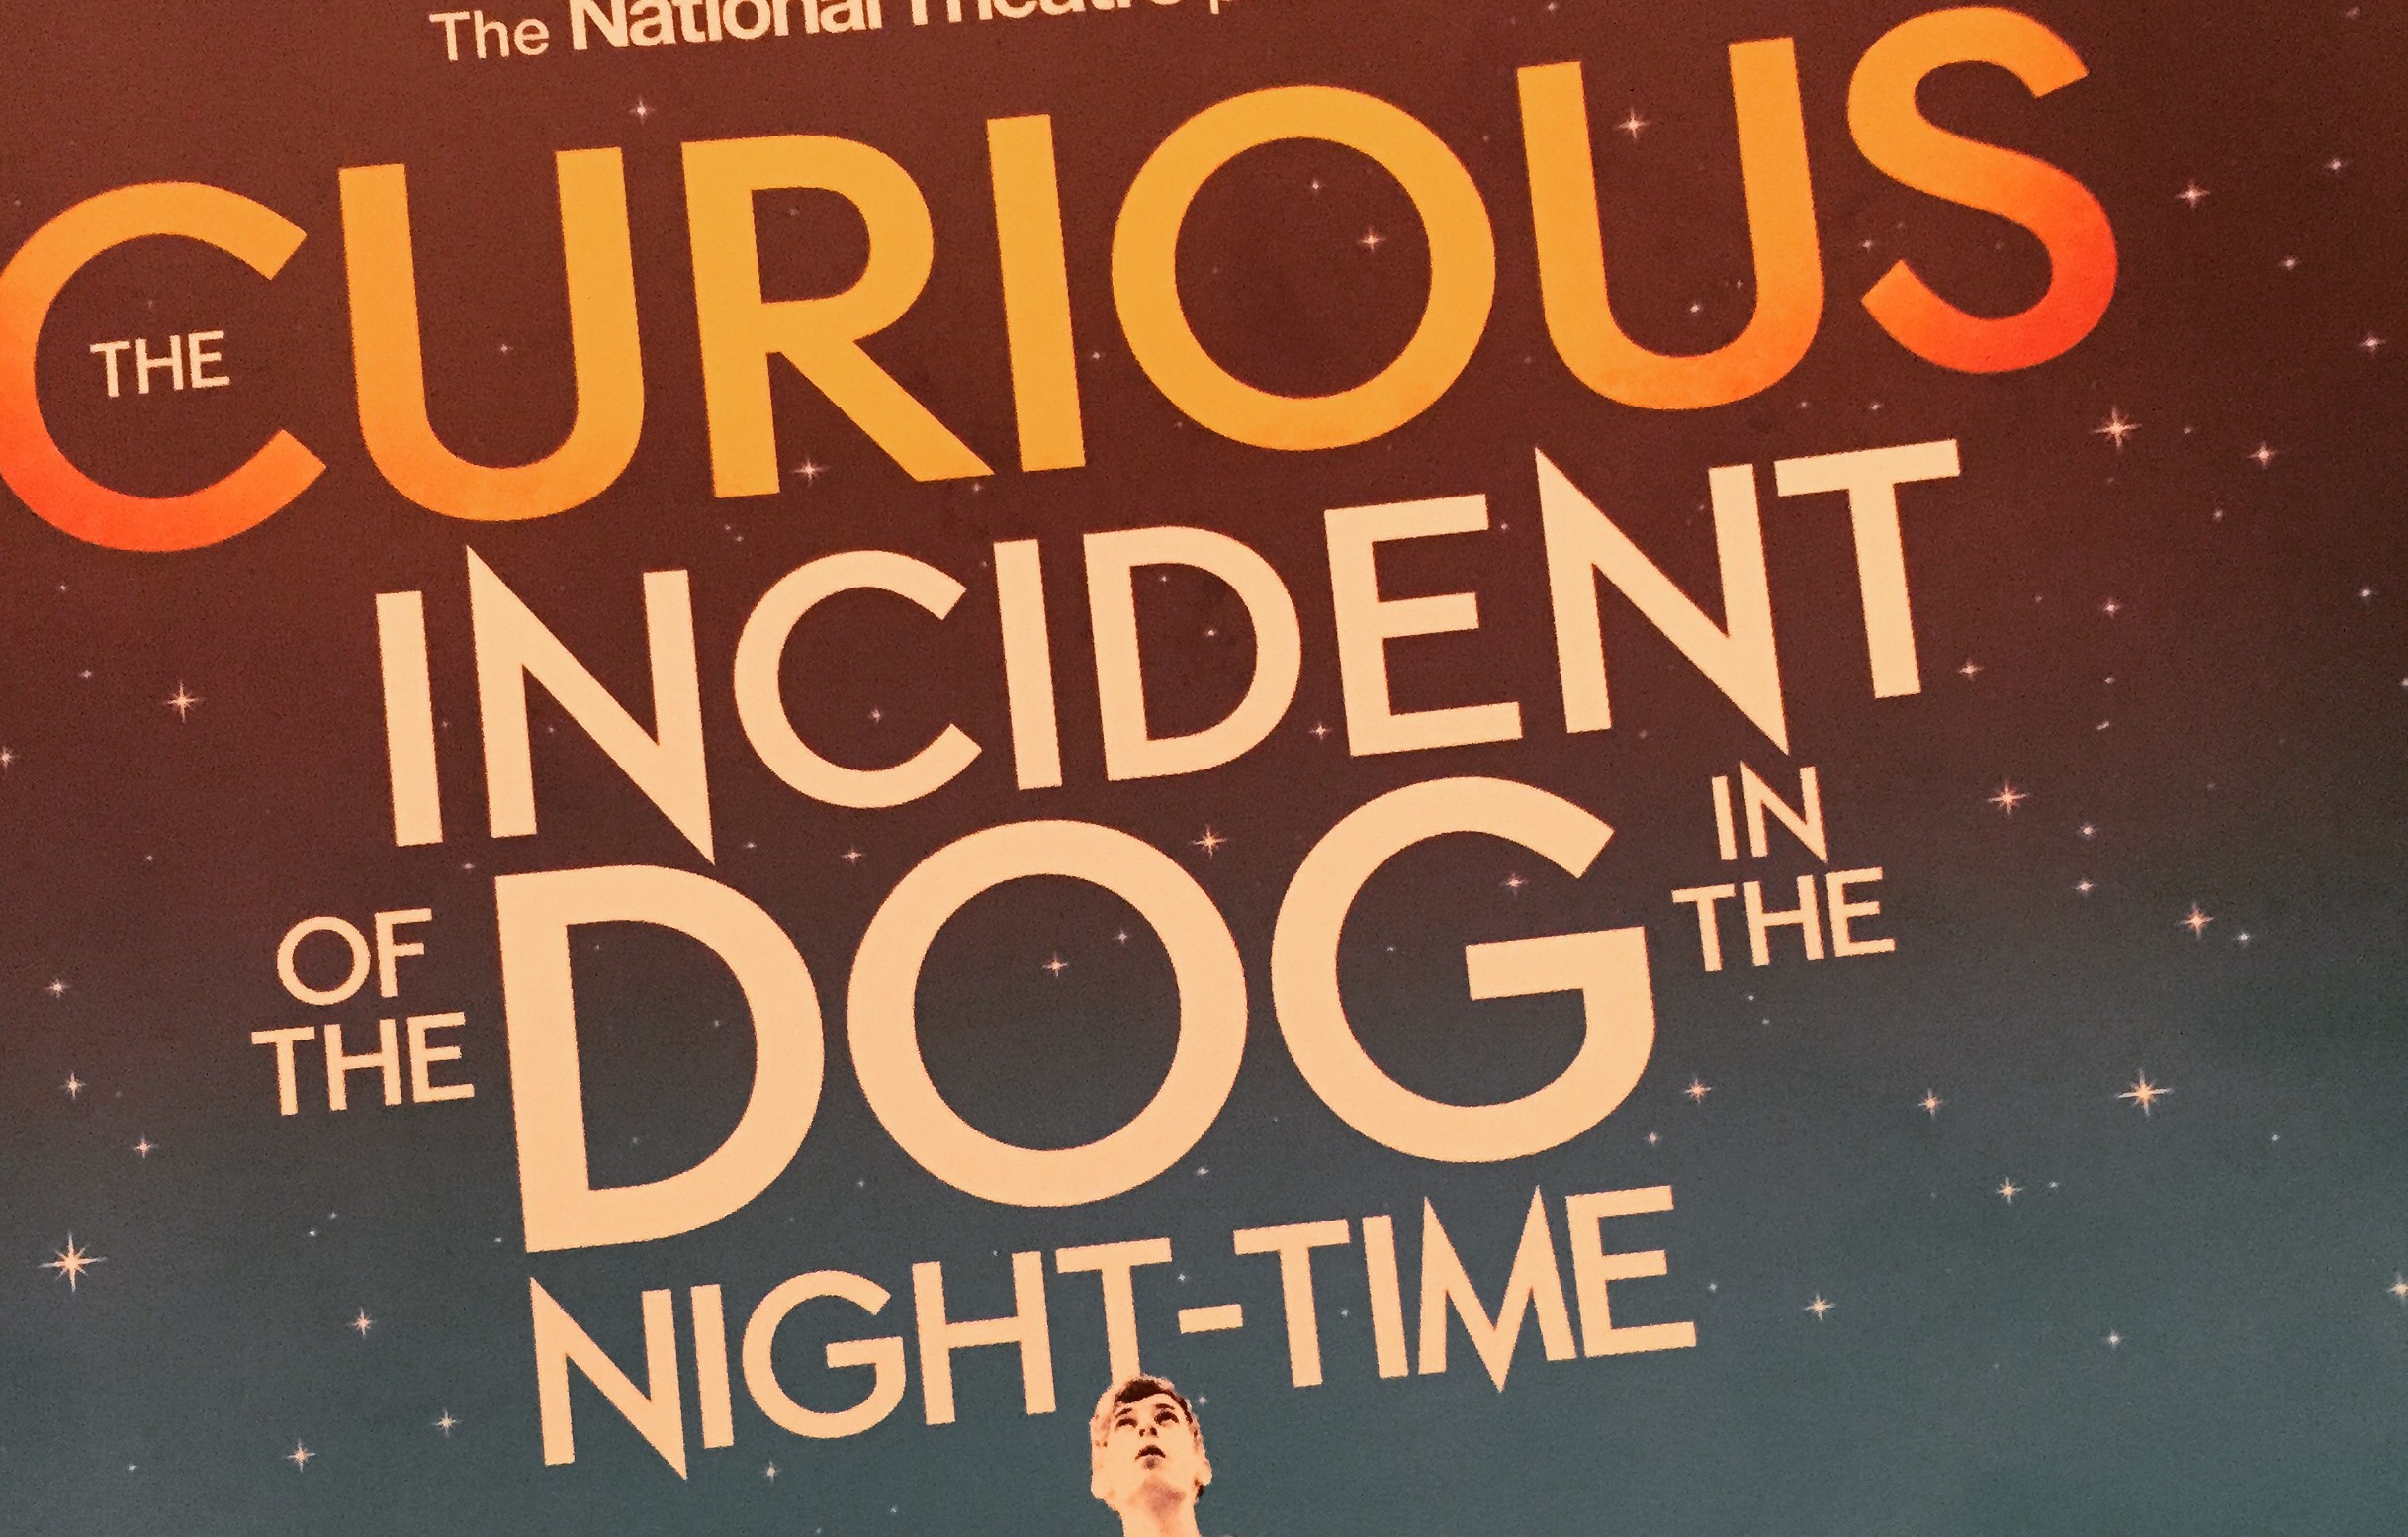 The Curious Incident of the Dog in the Night Time Review